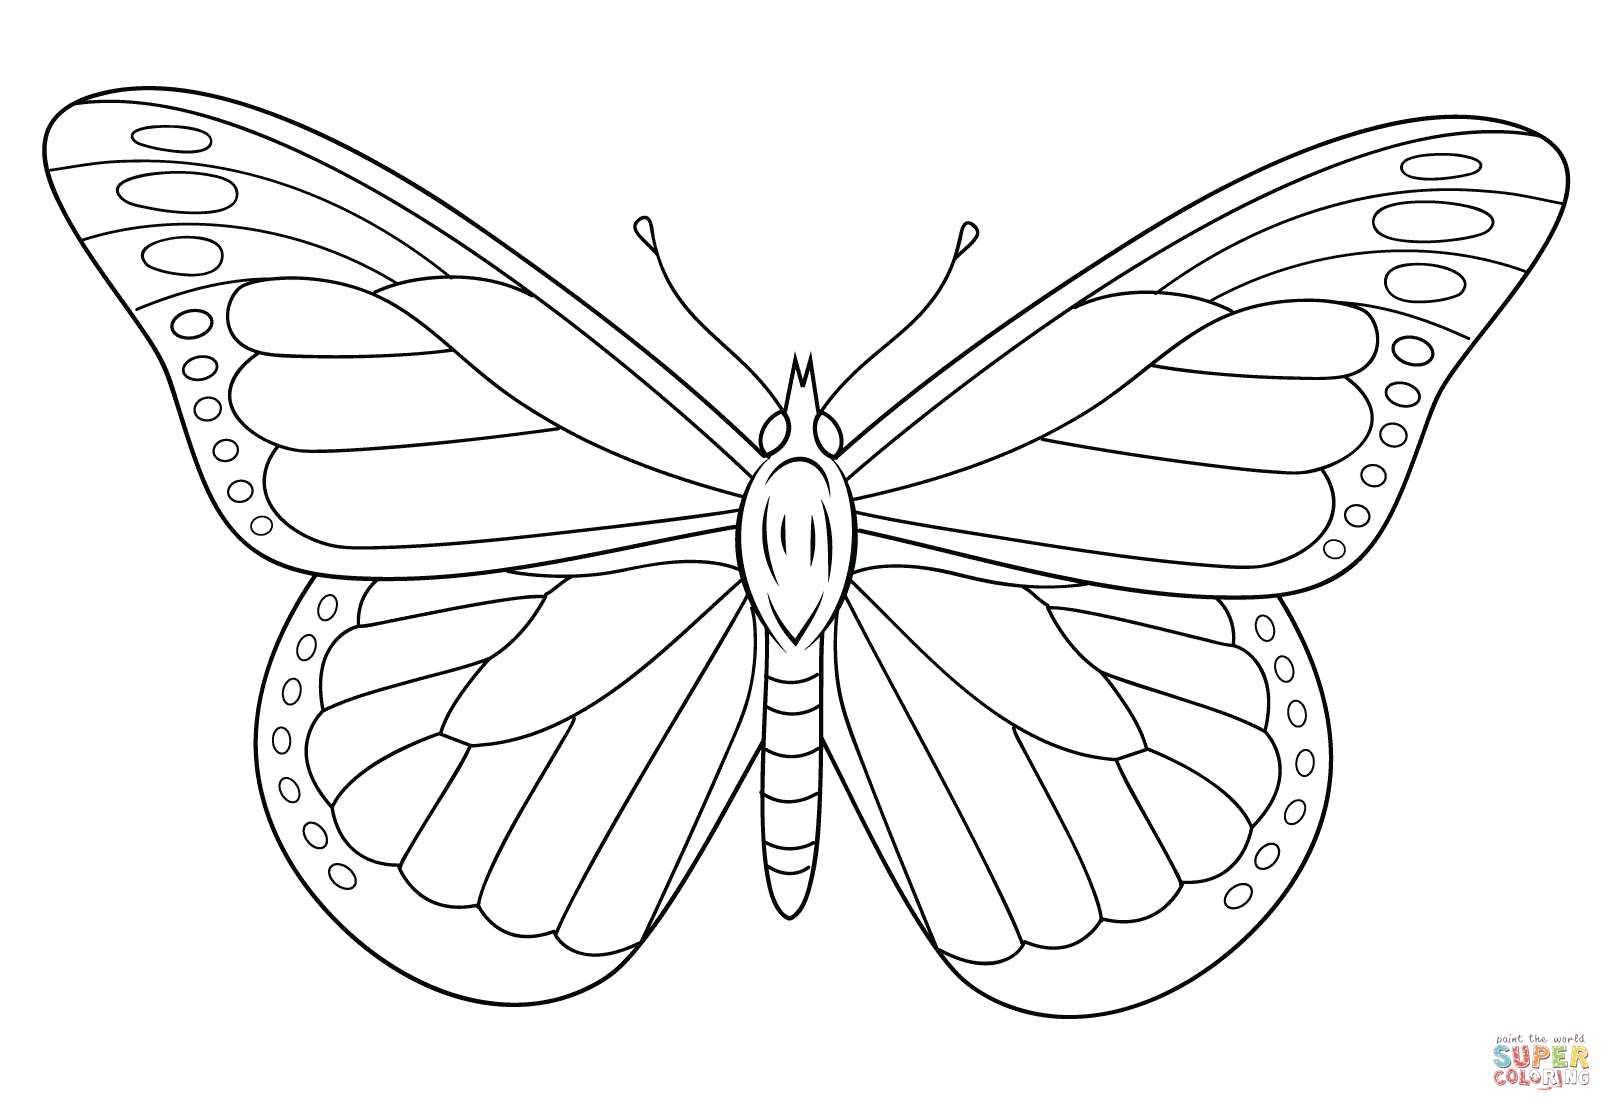 Monarch butterfly coloring pages download and print for free